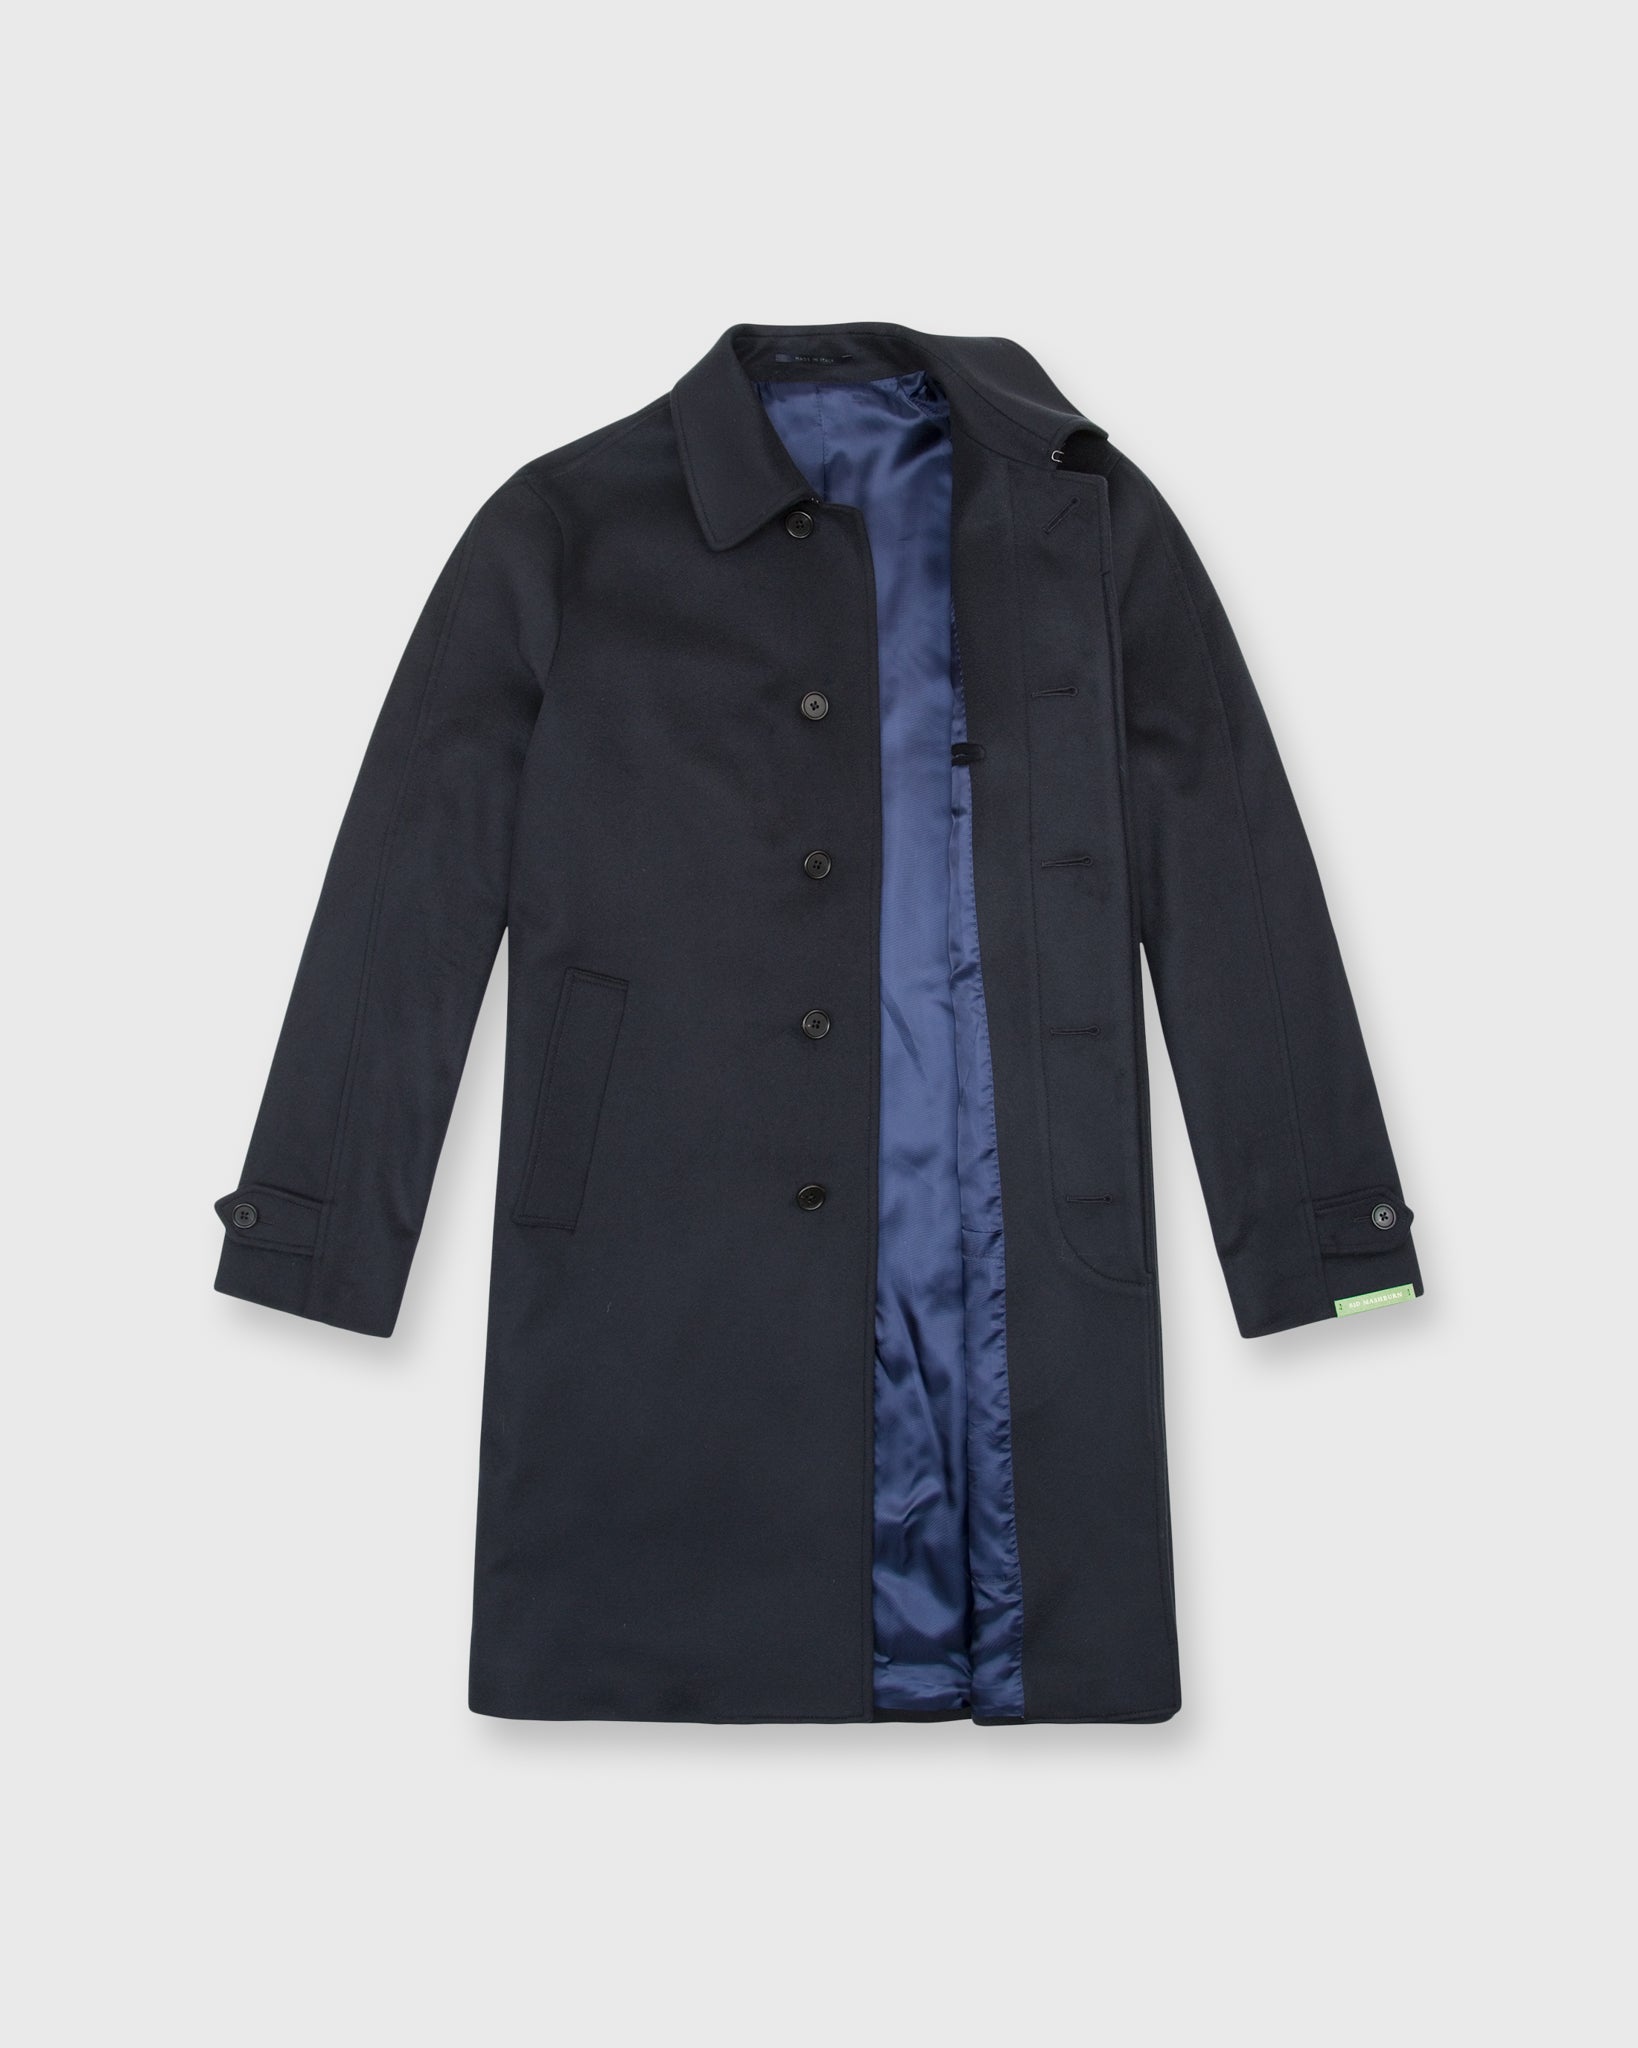 Tailored Traveler's Trench Navy Wool/Cashmere